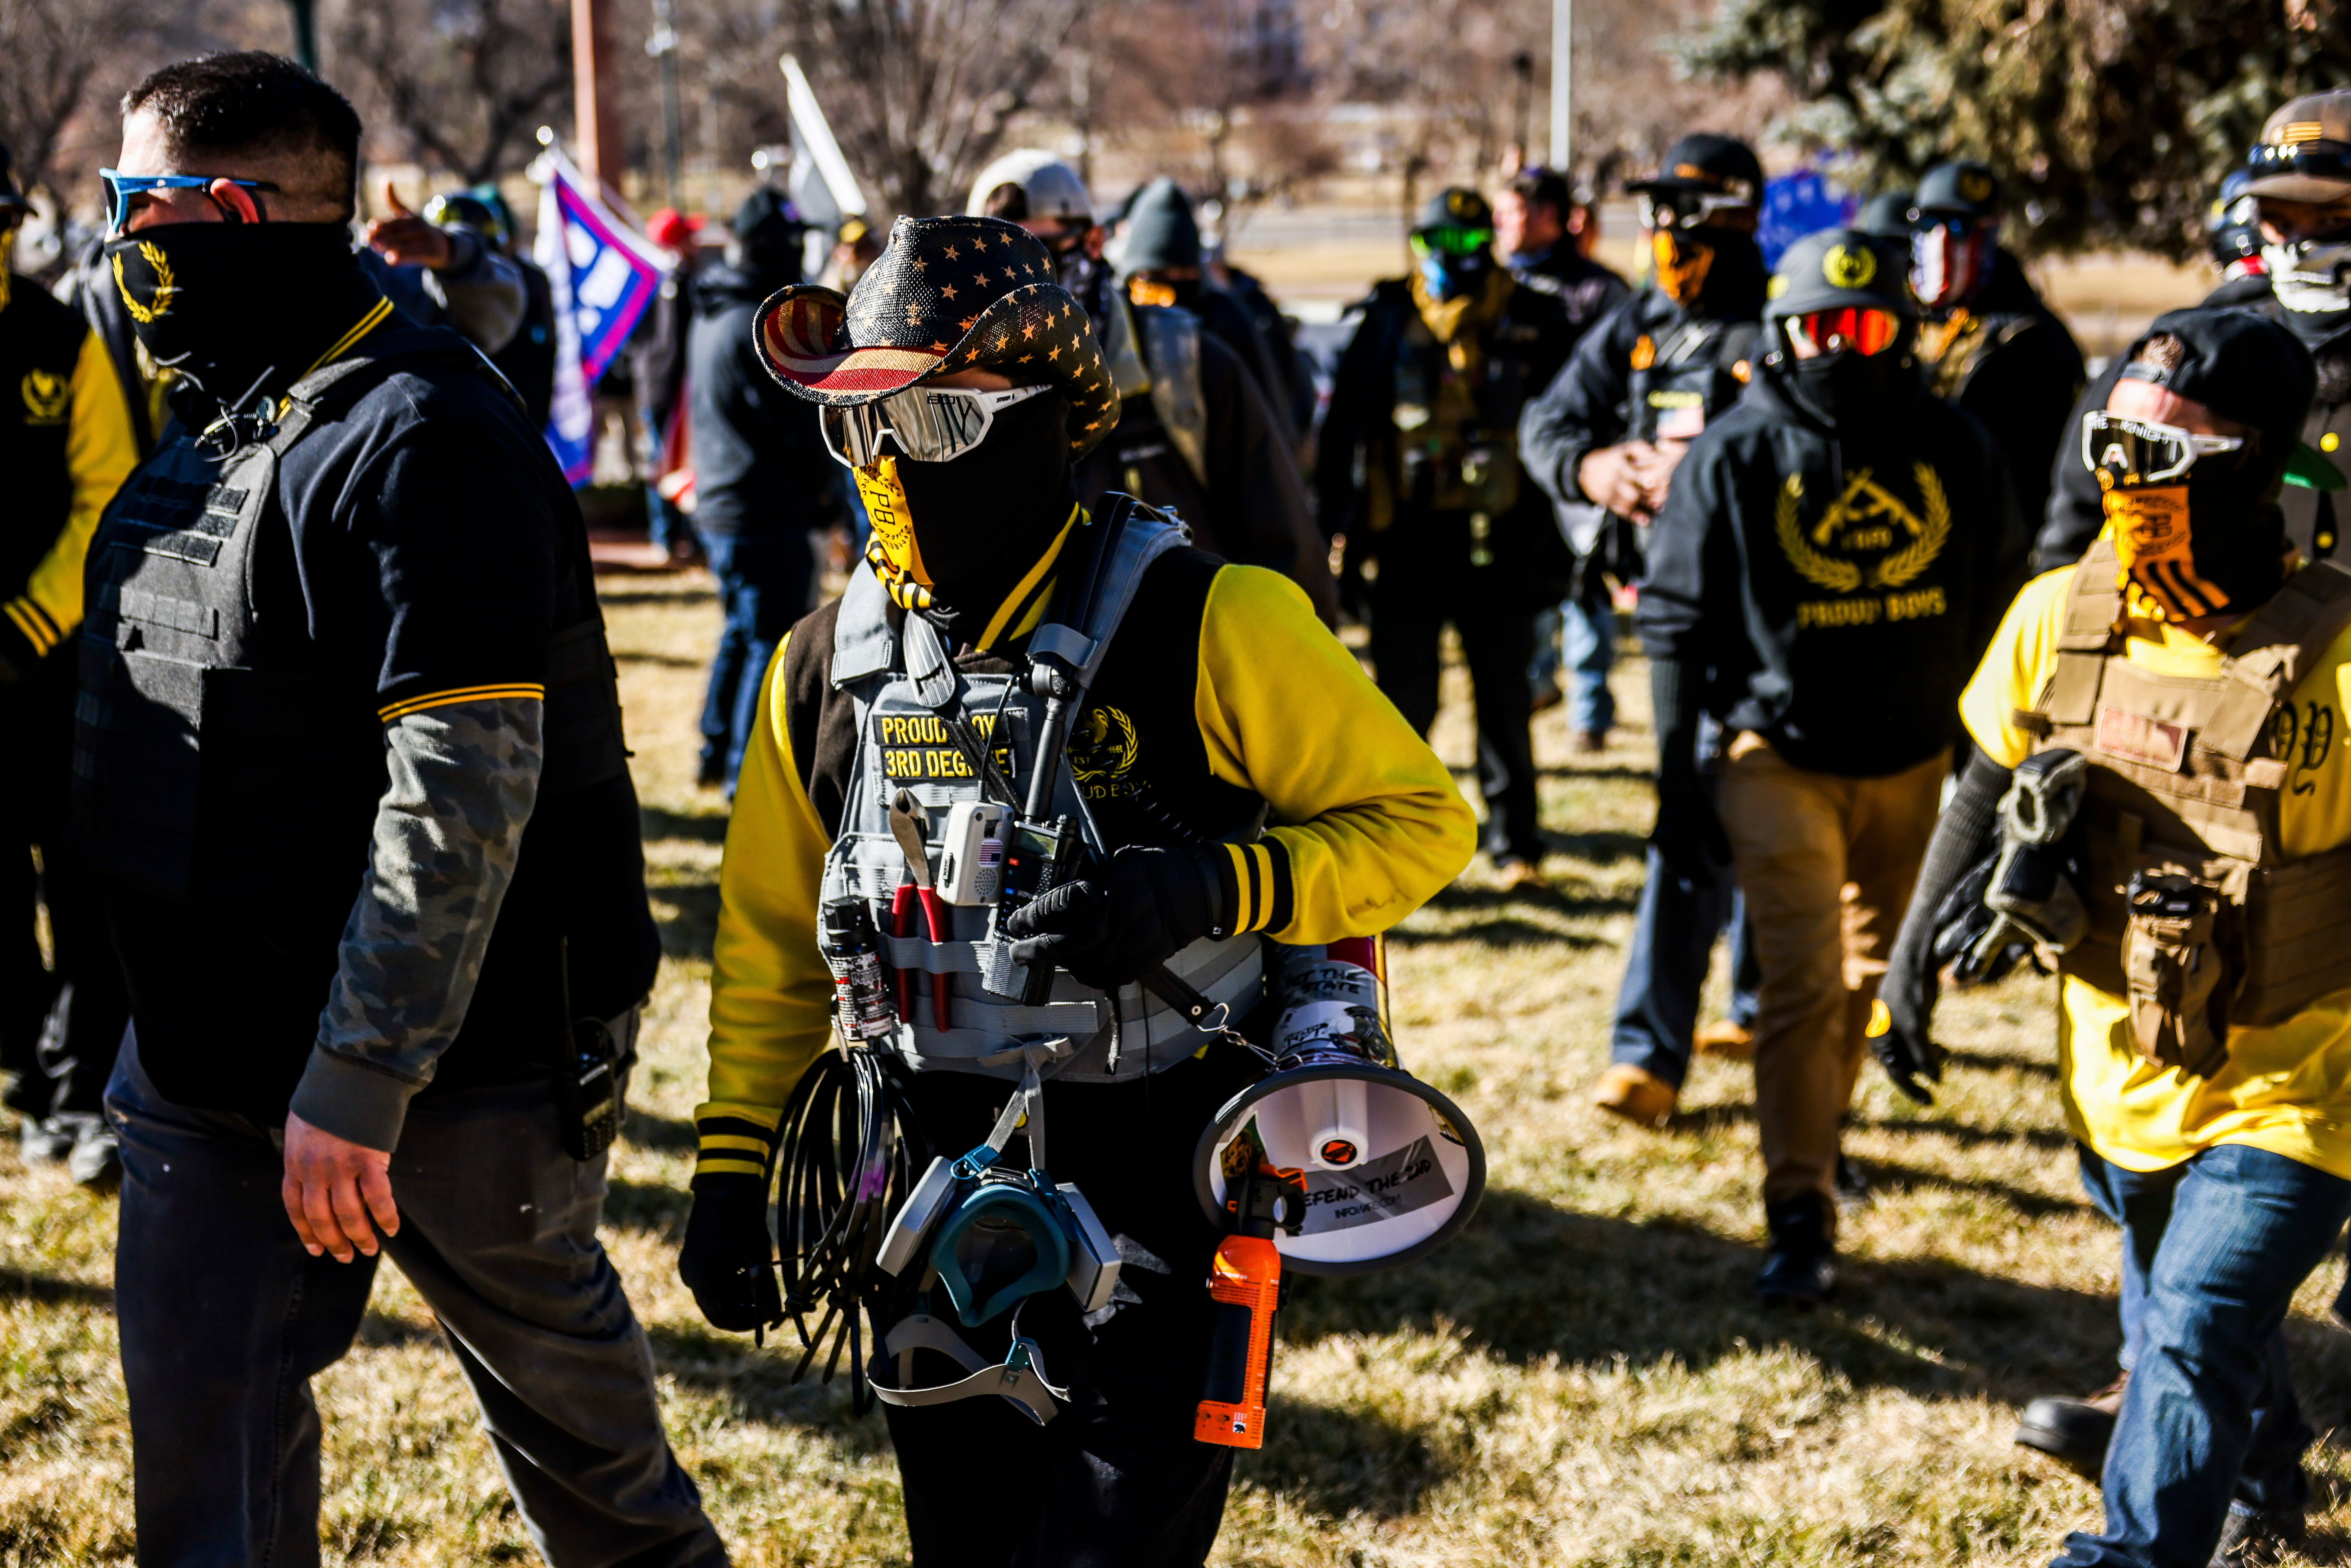 Proud Boys march at a protest in Colorado on January 6